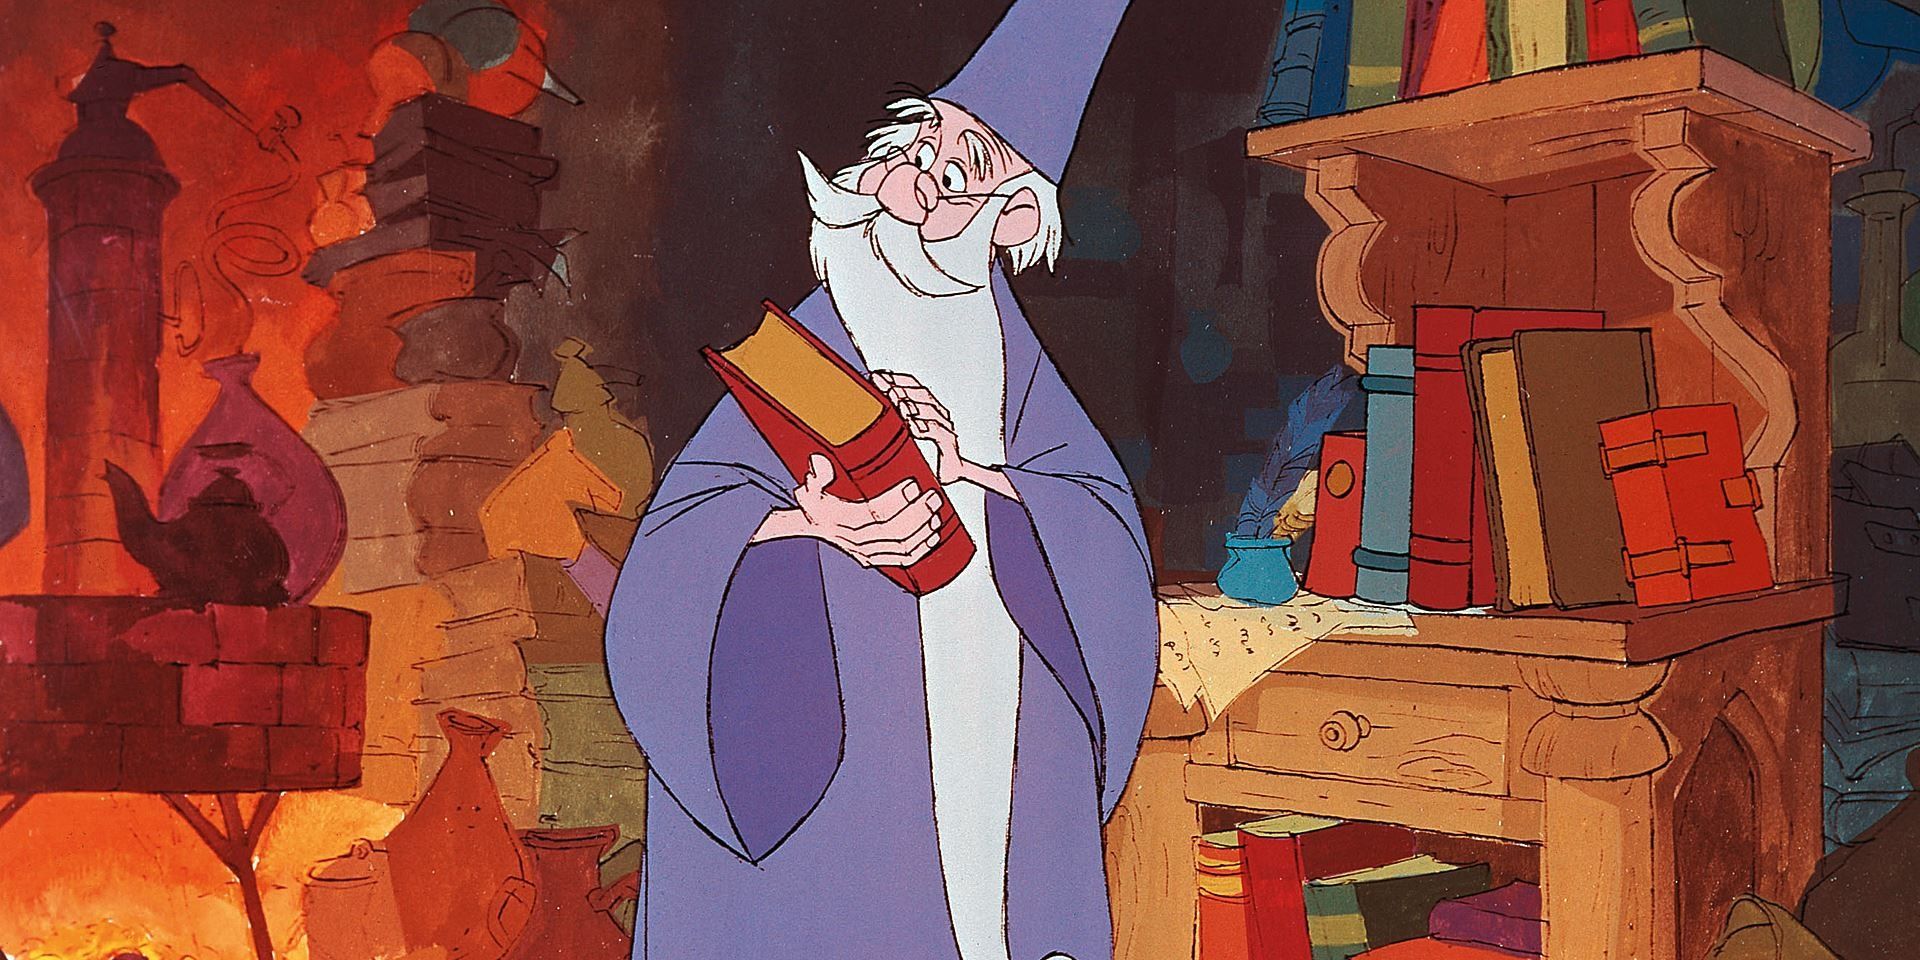 Merlin holding a book in The Sword in the Stone